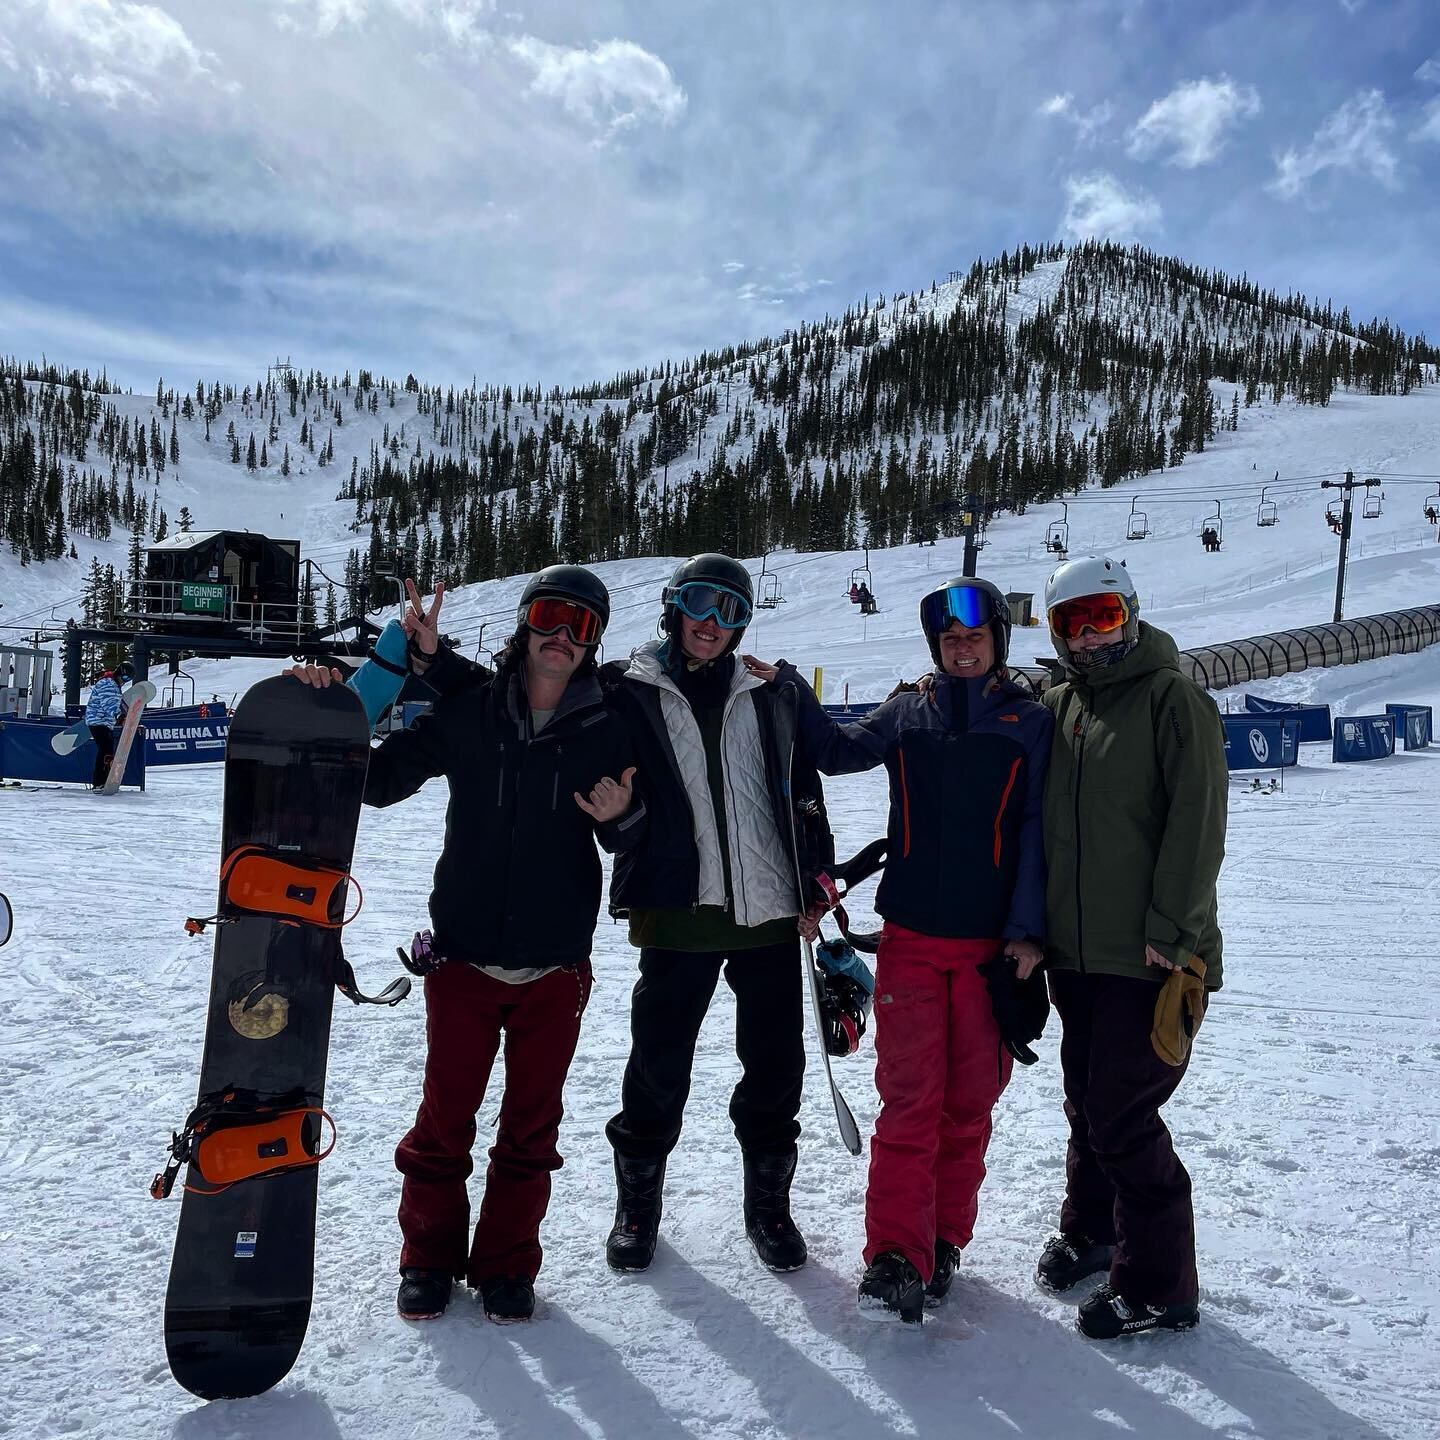 How do we spend our days off? With @monarchmountain (and our favorite coworkers) of course. More snow coming soon!🤍🏂

If you&rsquo;re looking for something a little warmer and drier, we&rsquo;re back open again tomorrow evening starting off at 4pm.